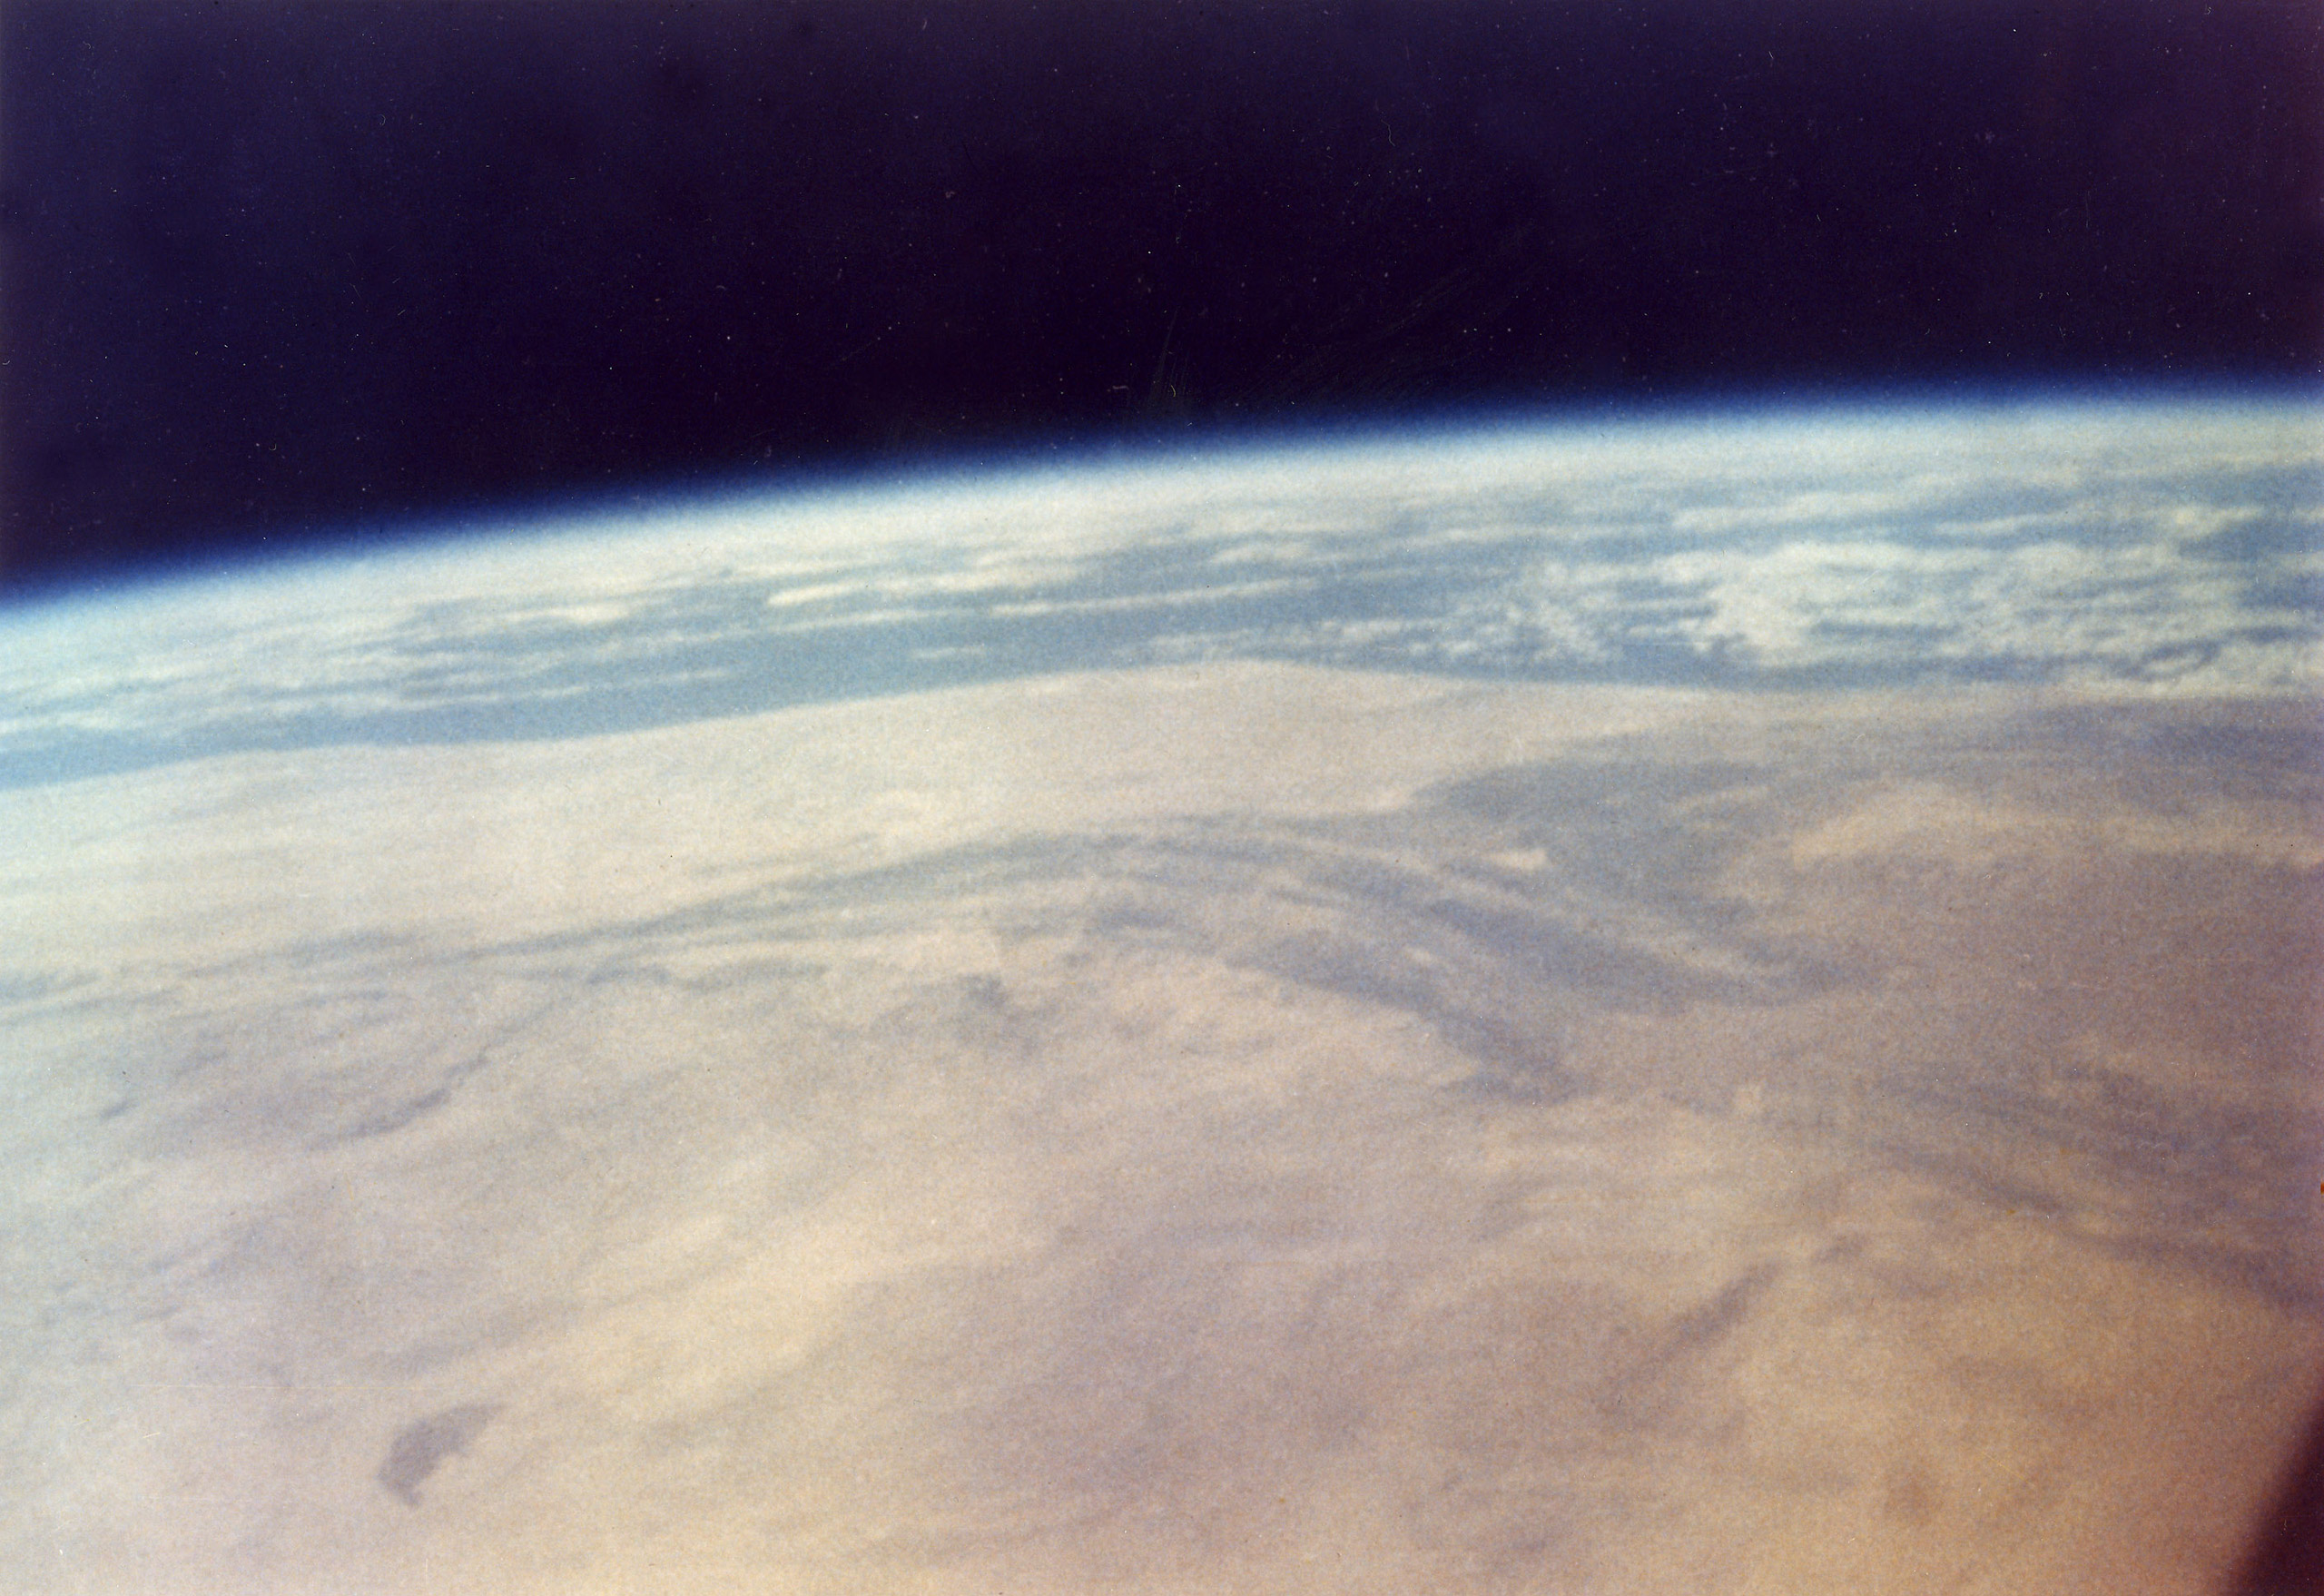 Color photograph of North Africa from space, taken by John Glenn in the Friendship 7 spacecraft during NASA's Project Mercury MA-6 mission, Feb. 20, 1962